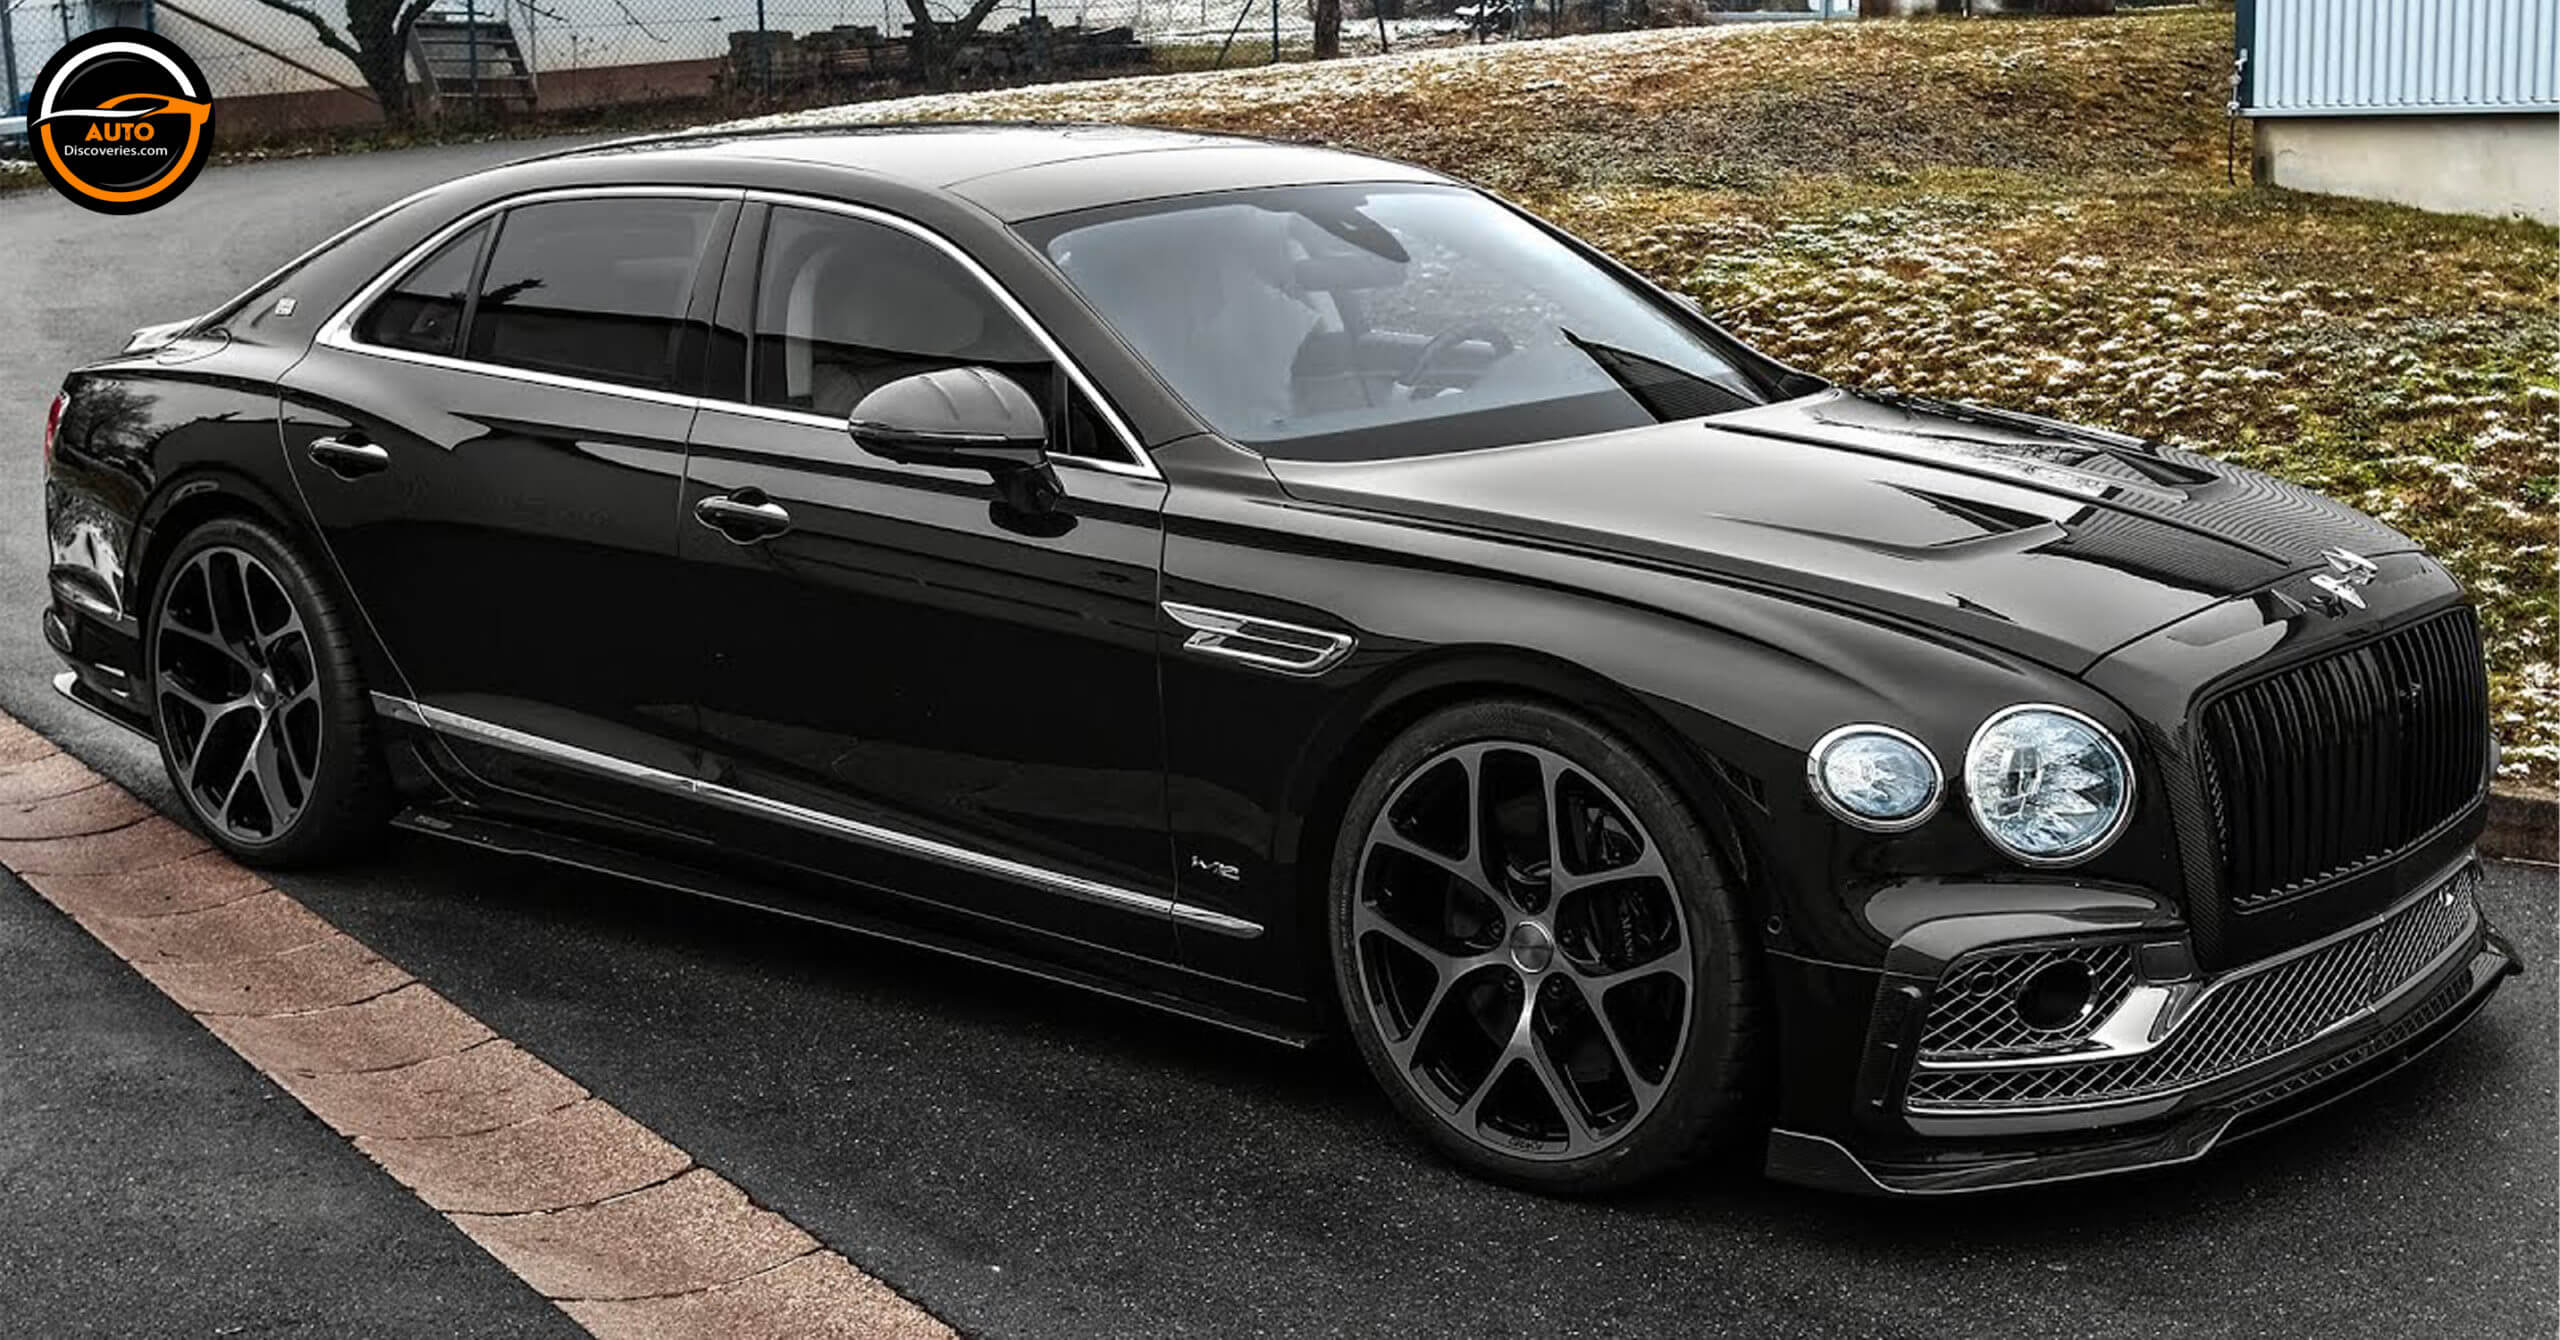 Bentley Flying Spur W12 Angry Luxury Sedan From MANSORY Auto